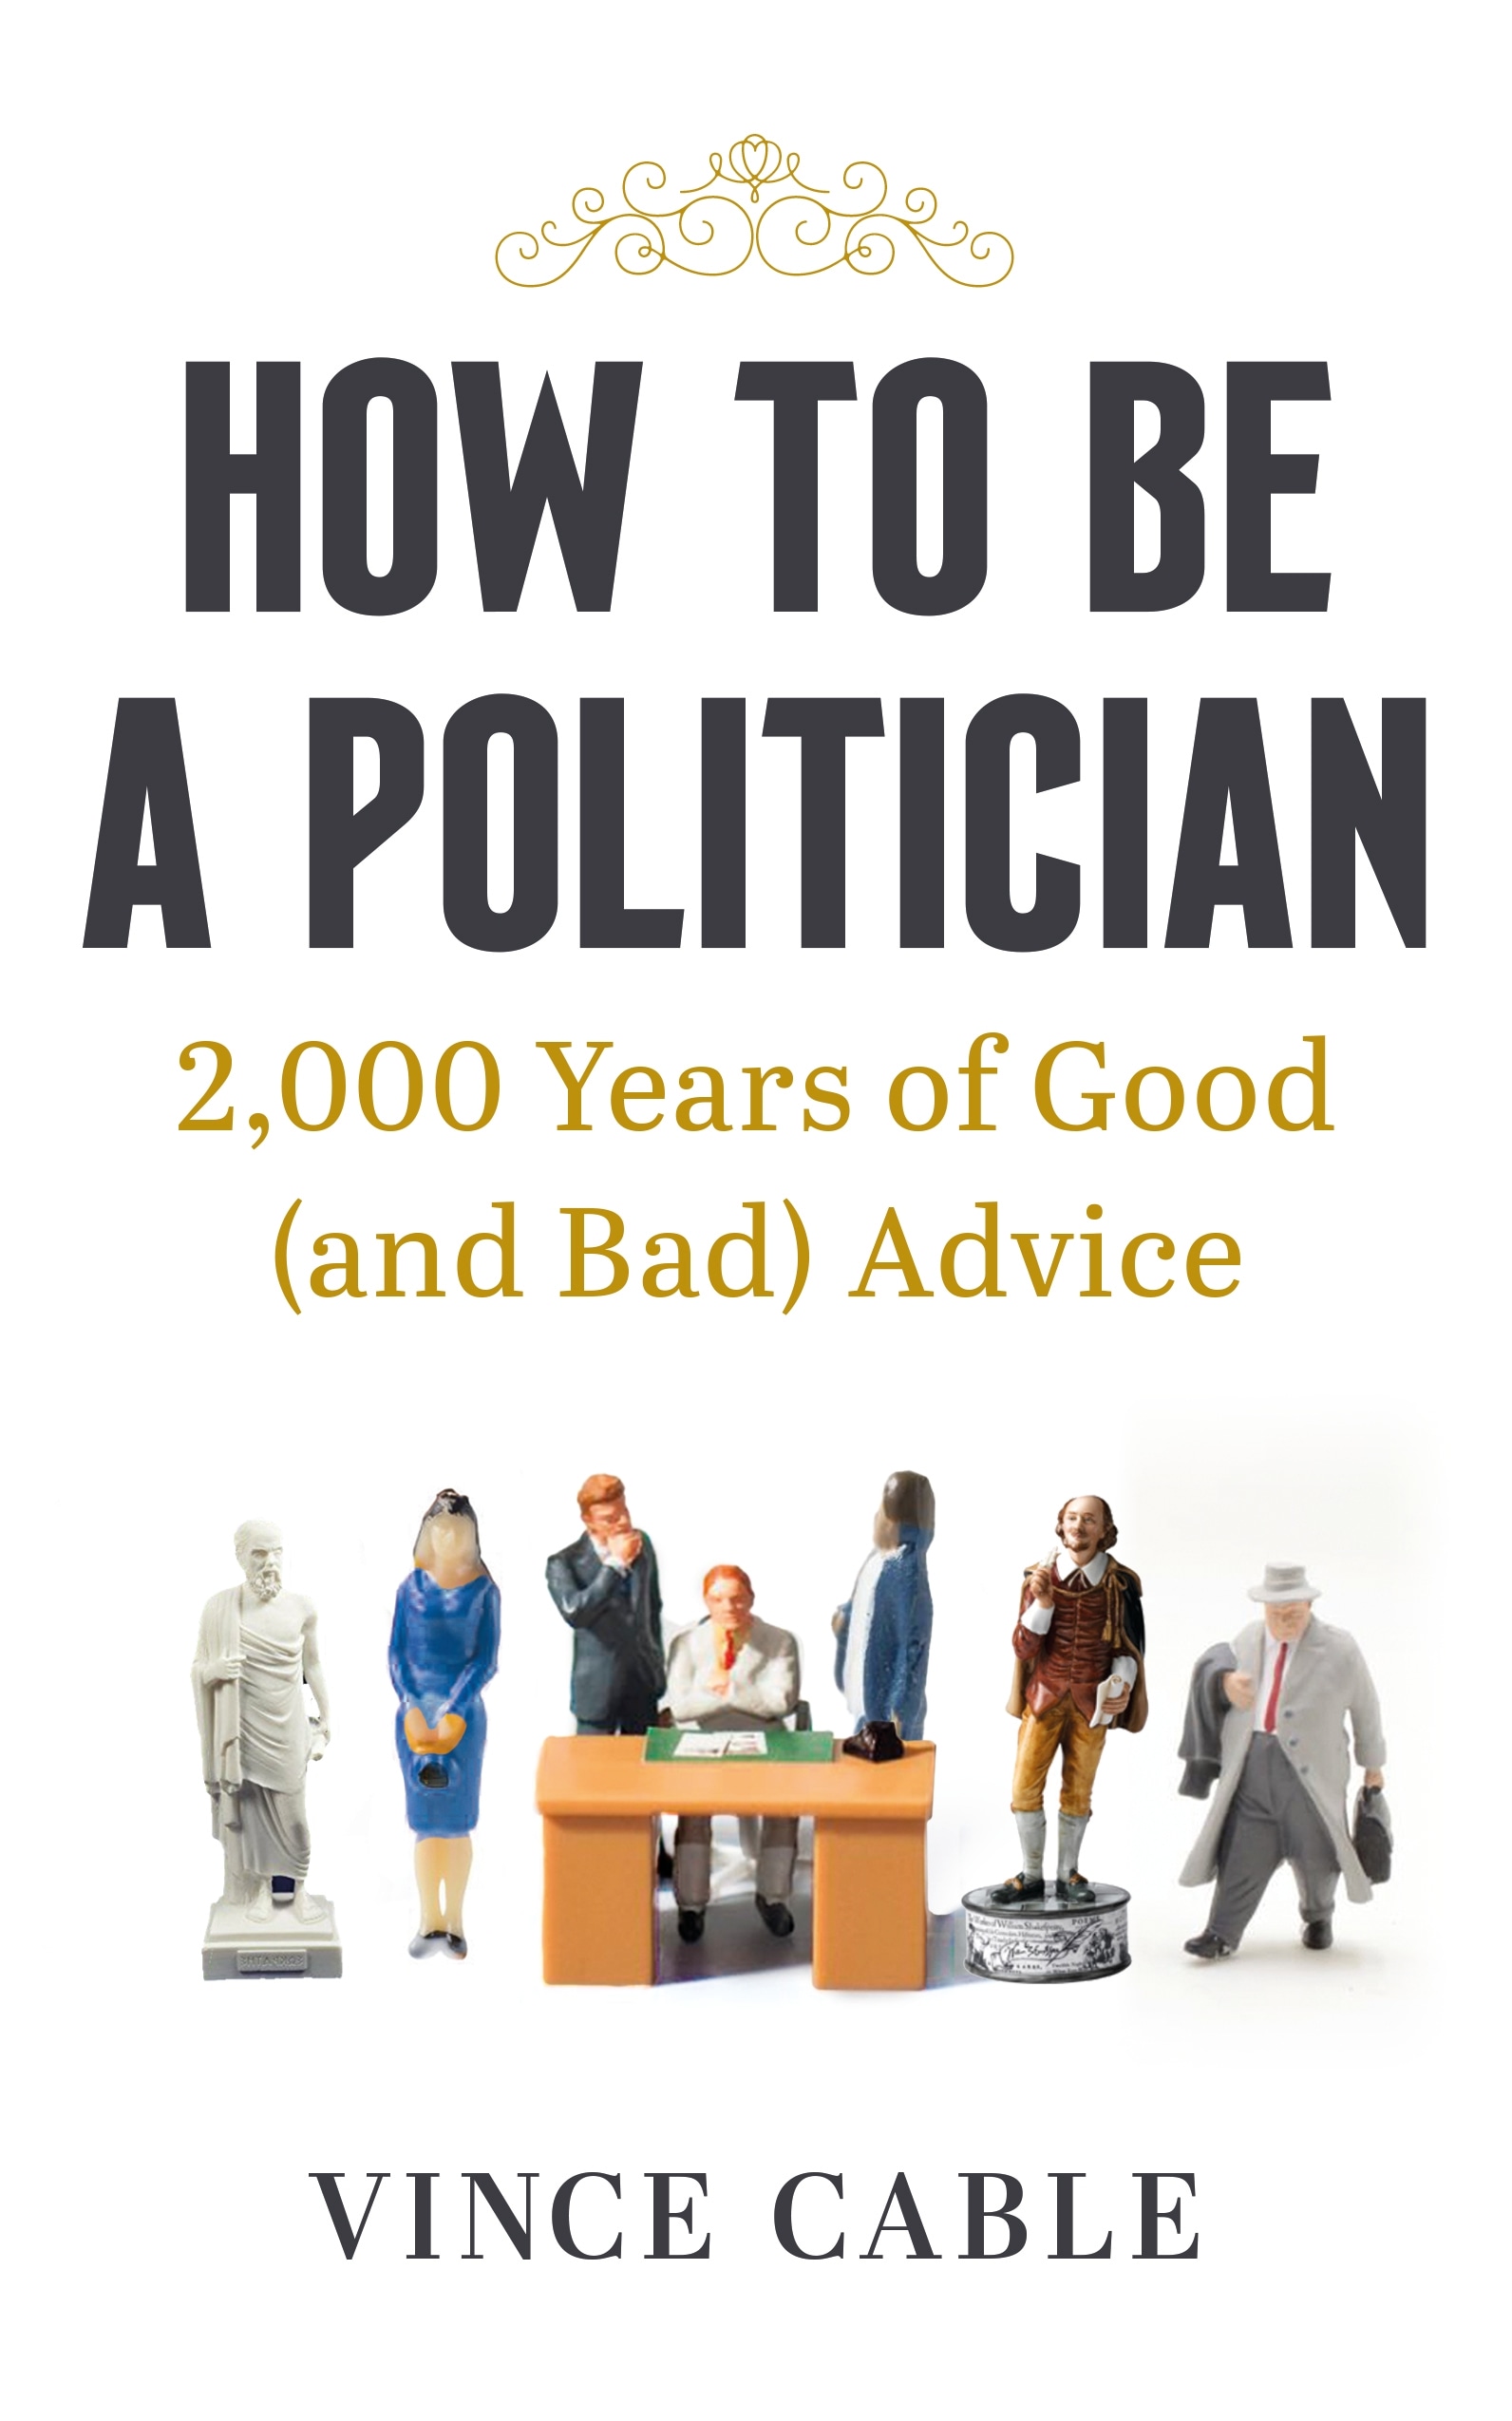 Book “How to be a Politician” by Vince Cable — September 8, 2022